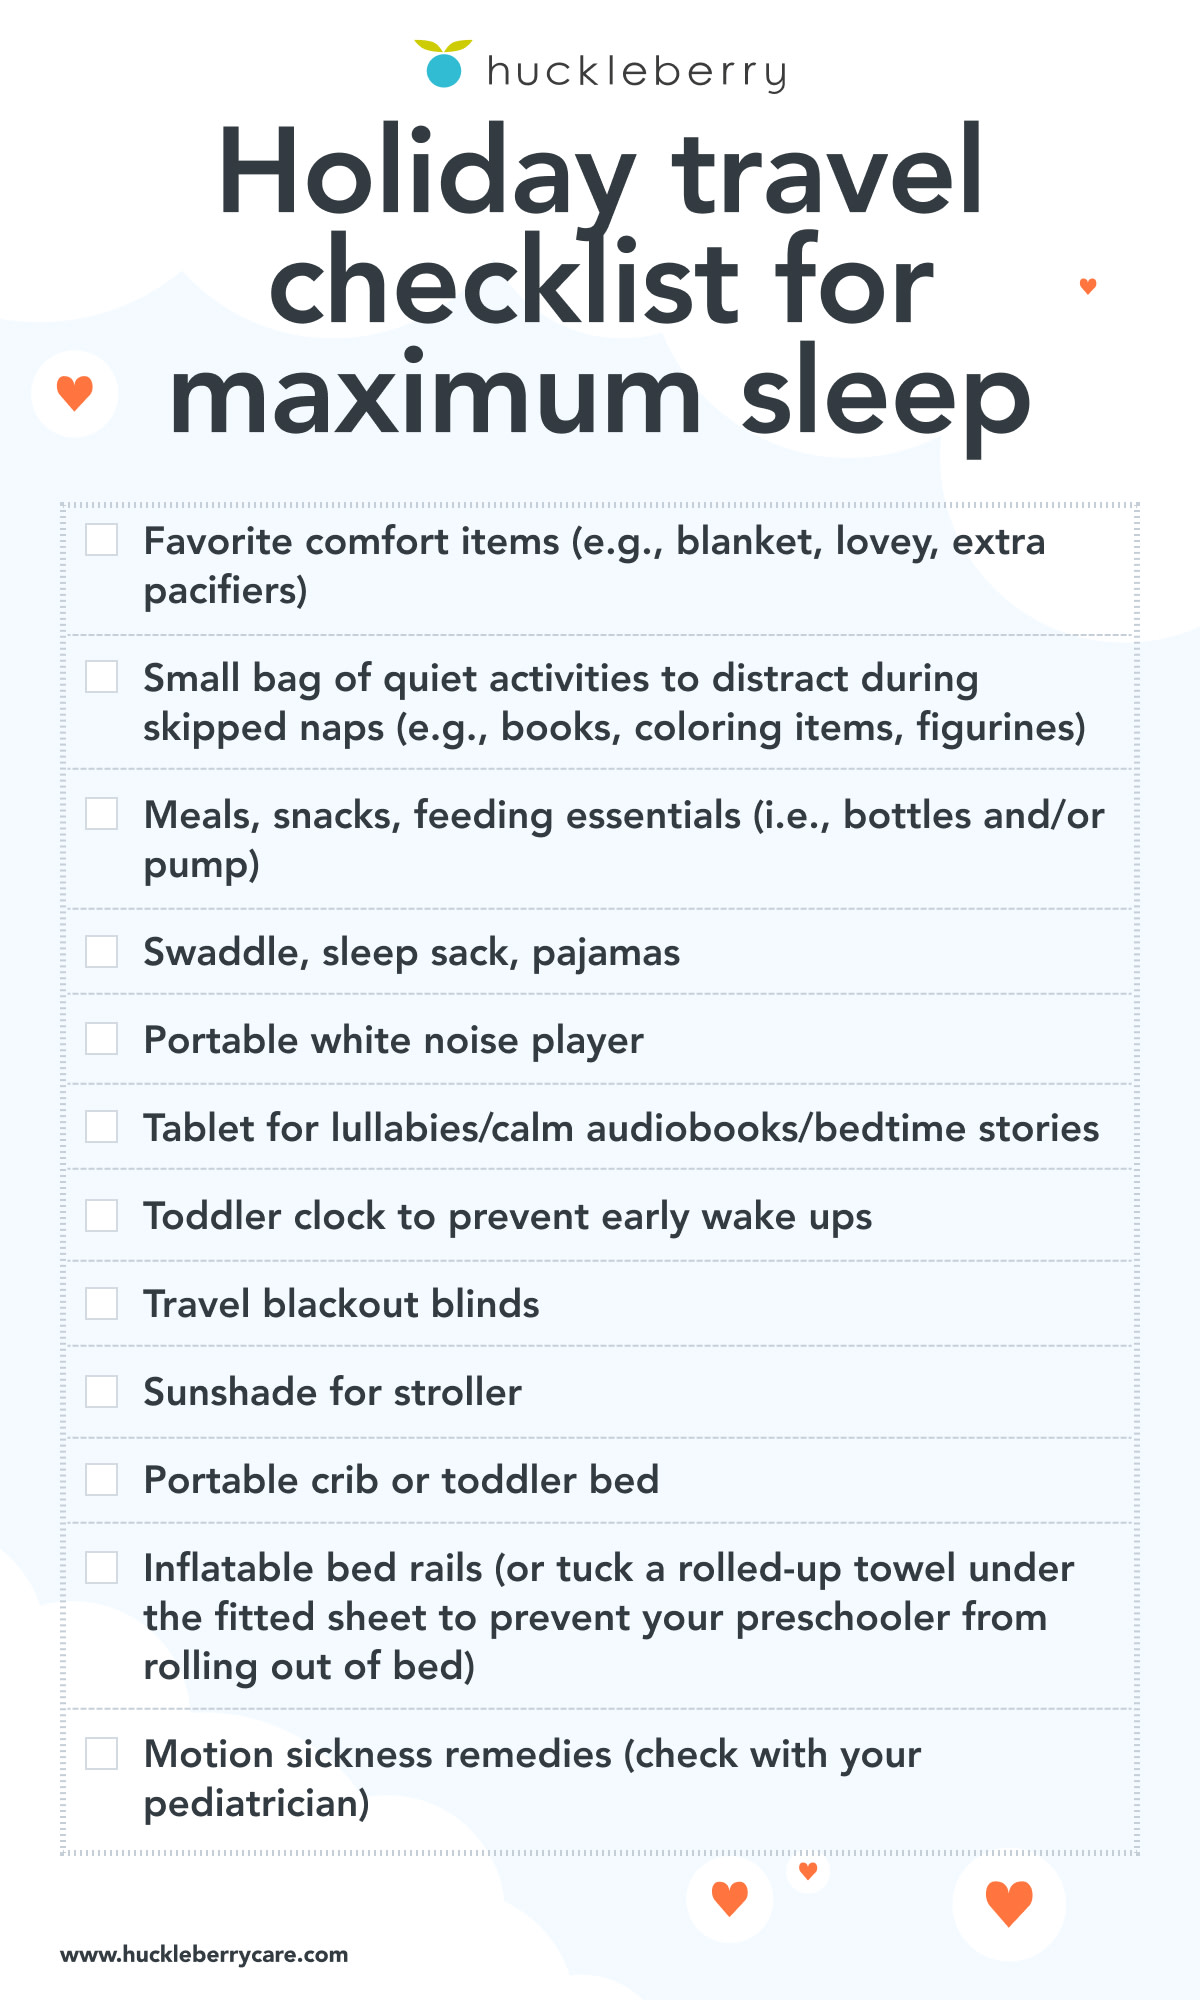 A graphic of the holiday travel checklist for maximum sleep.